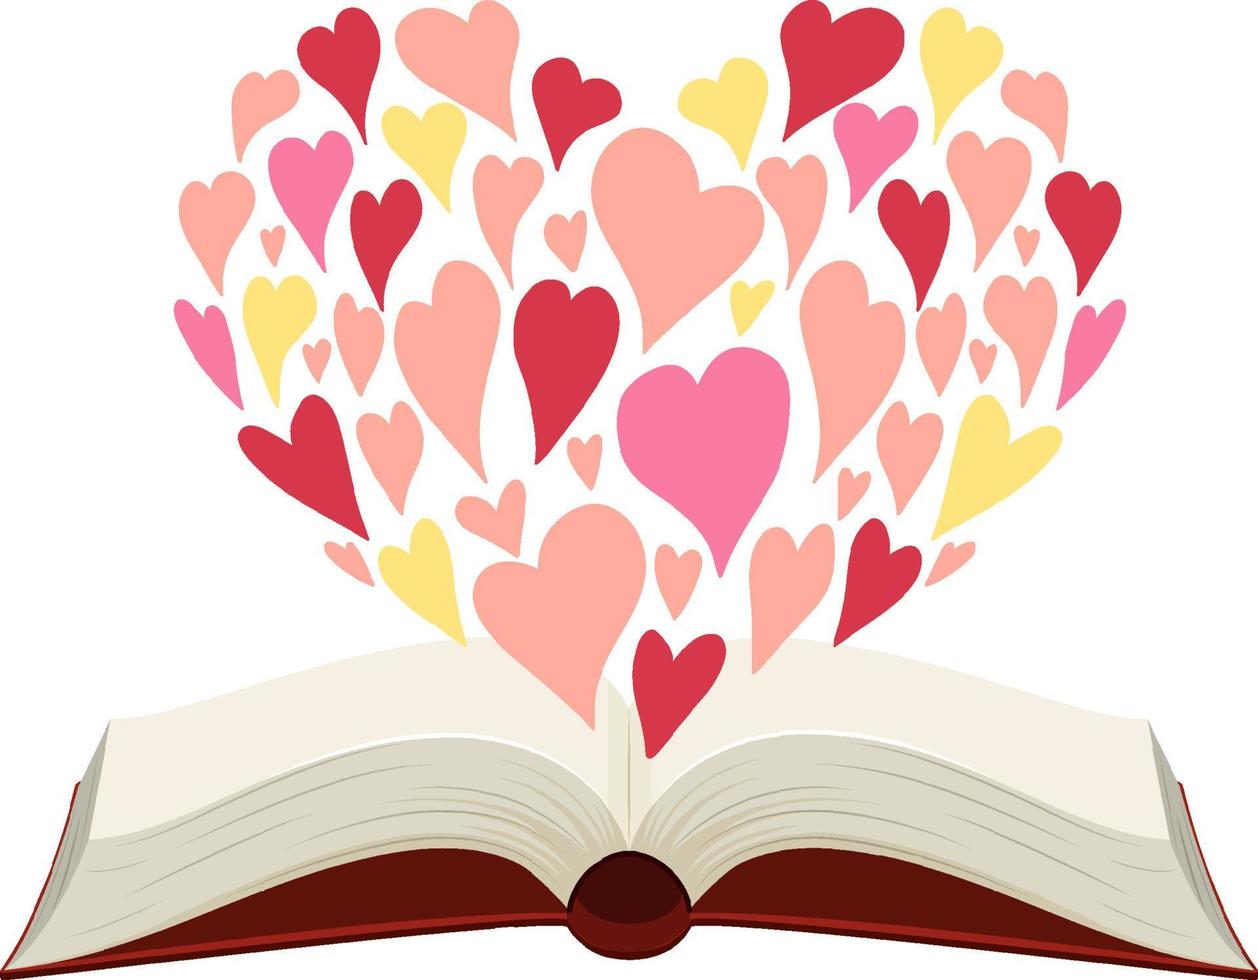 Opened book with many hearts forming a heart vector